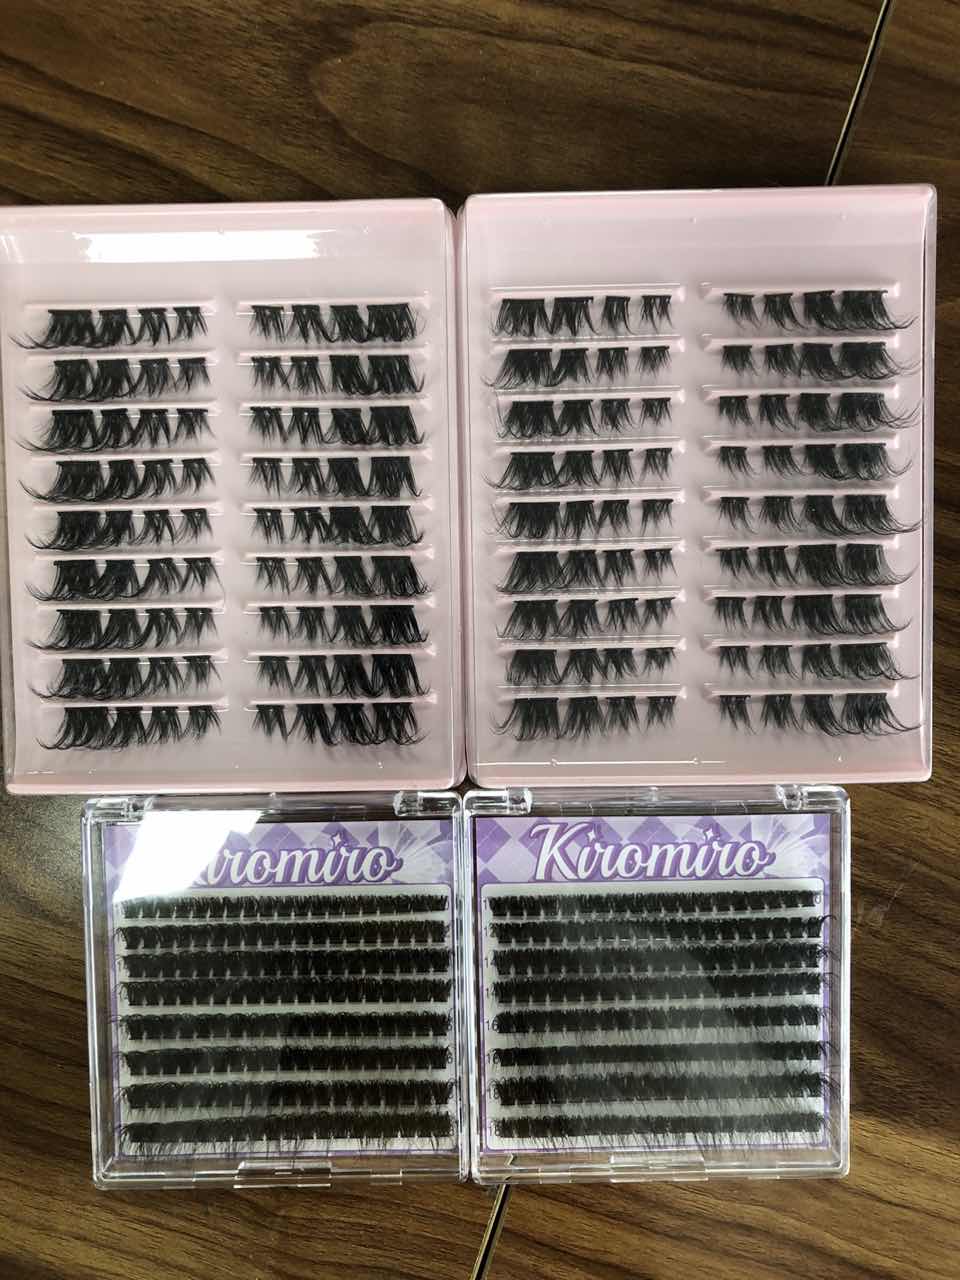 4 packs of lashes